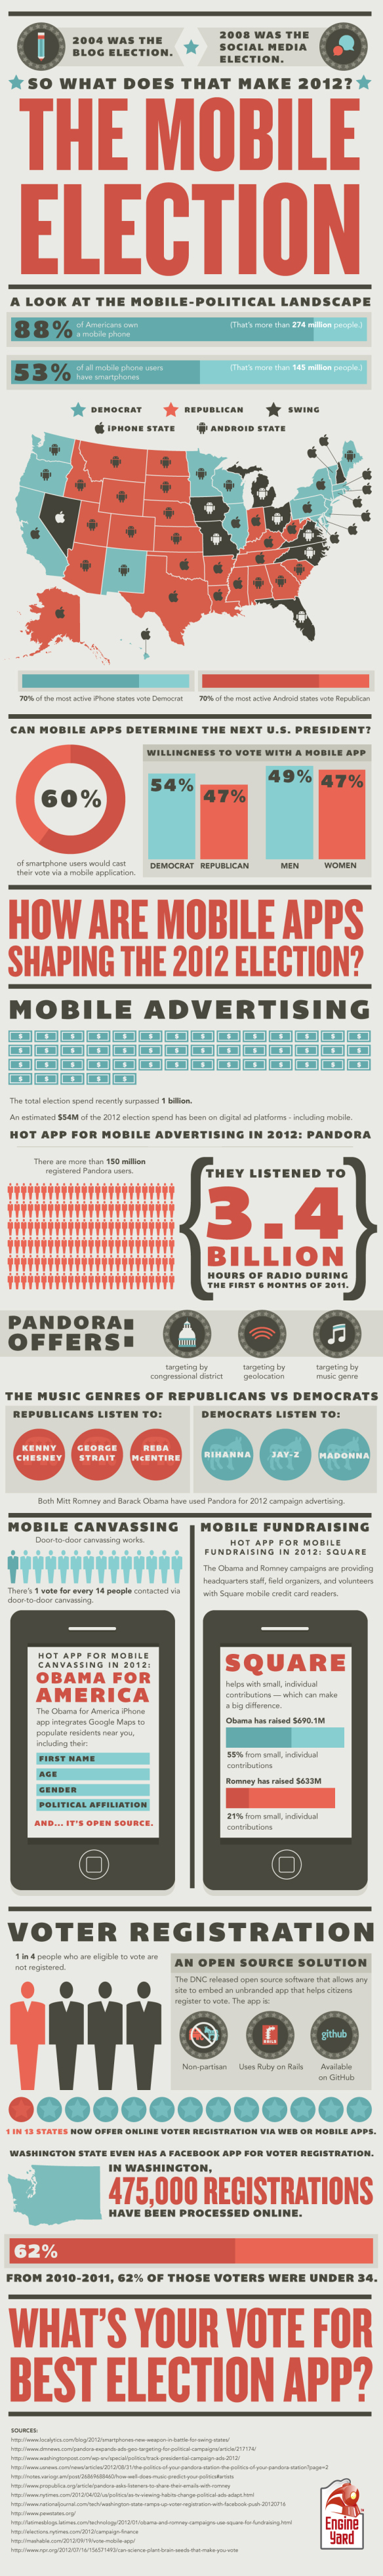 How the 2012 Election Became the Mobile Election